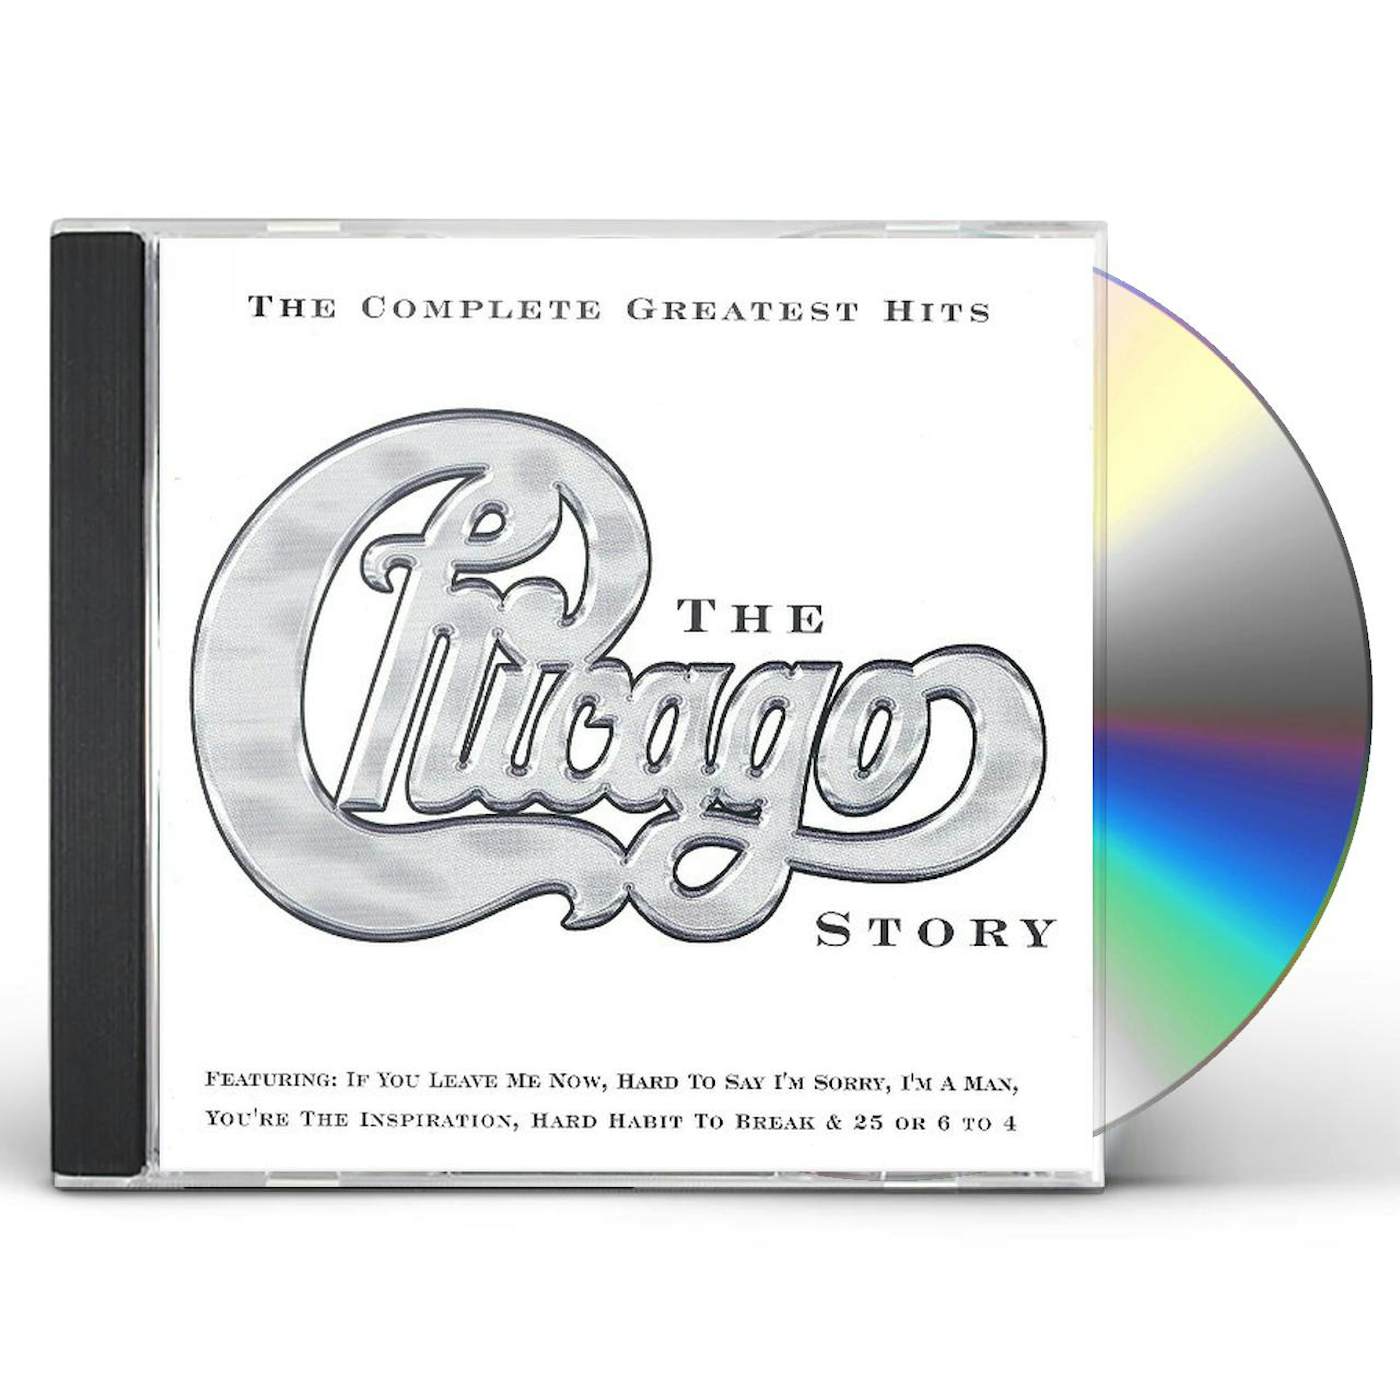 CHICAGO STORY: COMPLETE GREATEST HITS CD